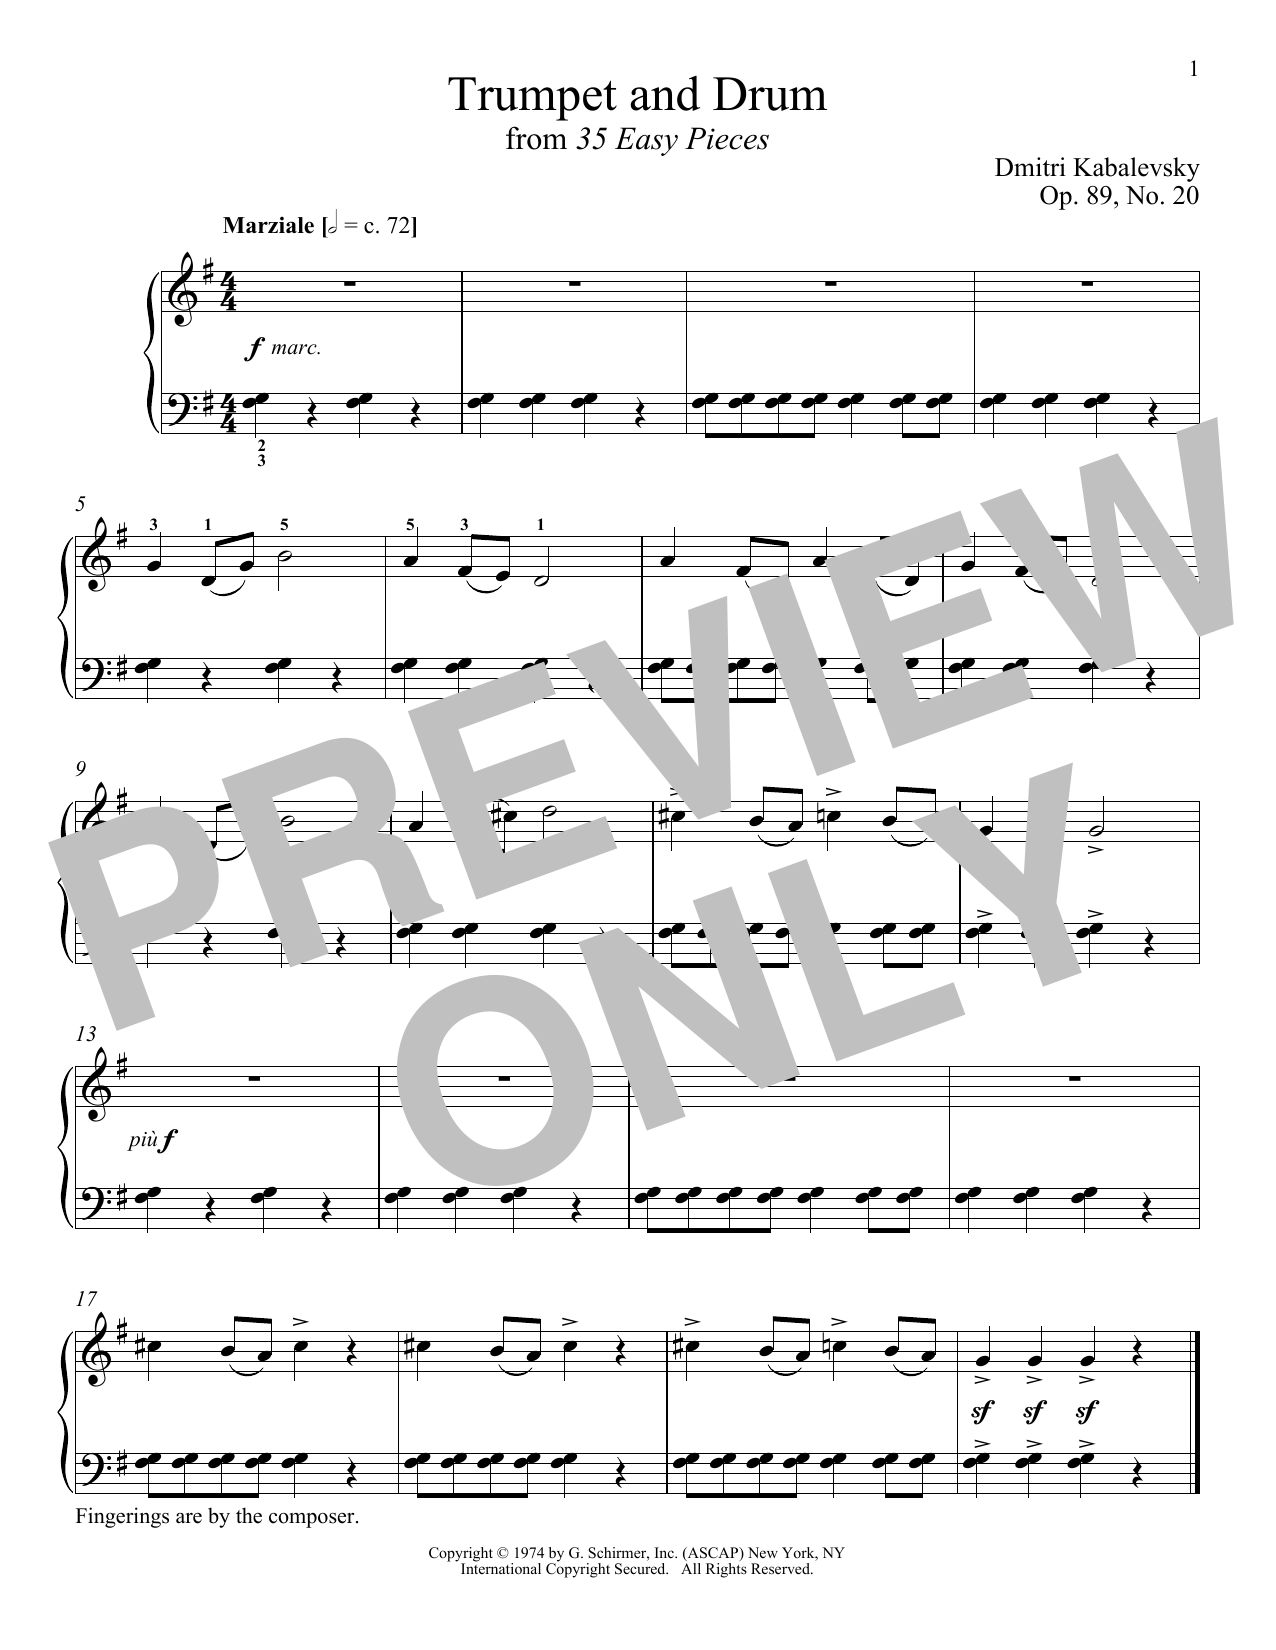 Dmitri Kabalevsky Trumpet And Drum, Op. 89, No. 20 sheet music notes and chords. Download Printable PDF.